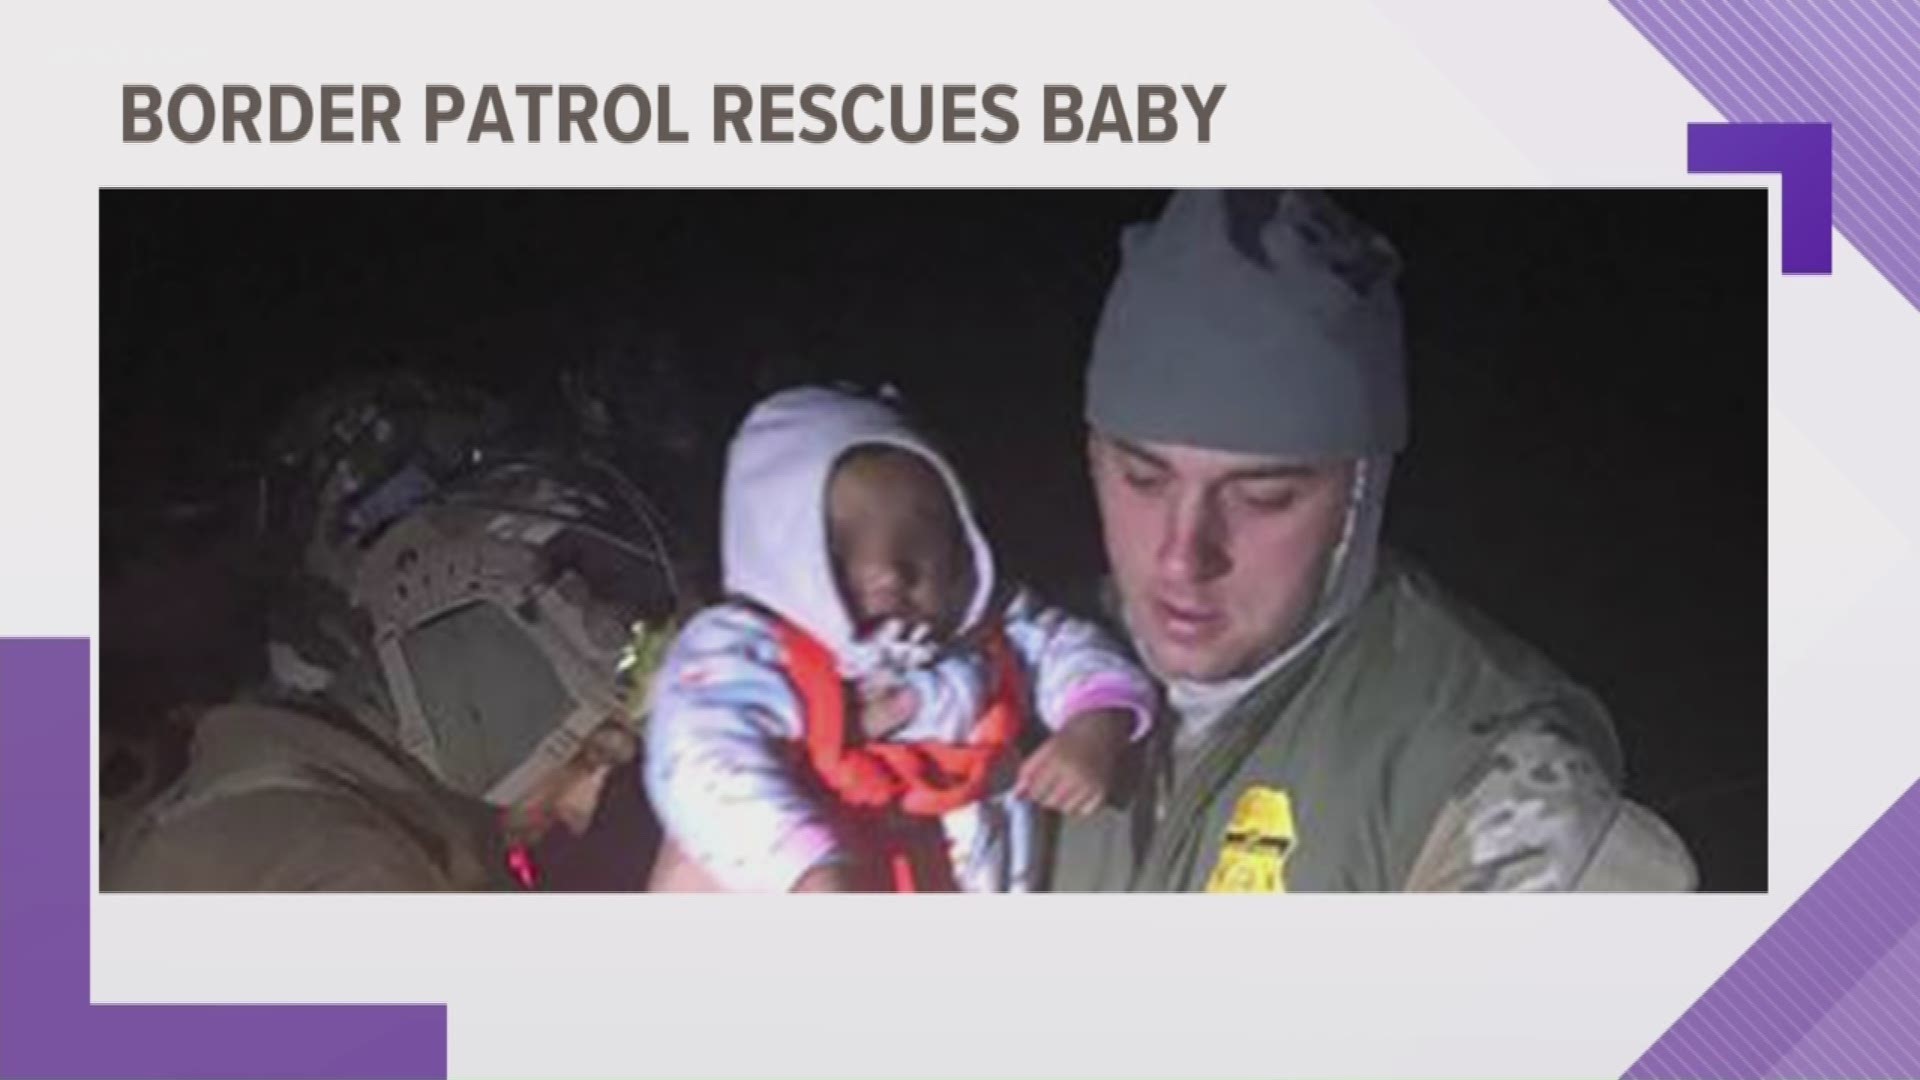 More than a dozen Central American migrants were rescued from the Rio Grande River Thursday, including a newborn baby.